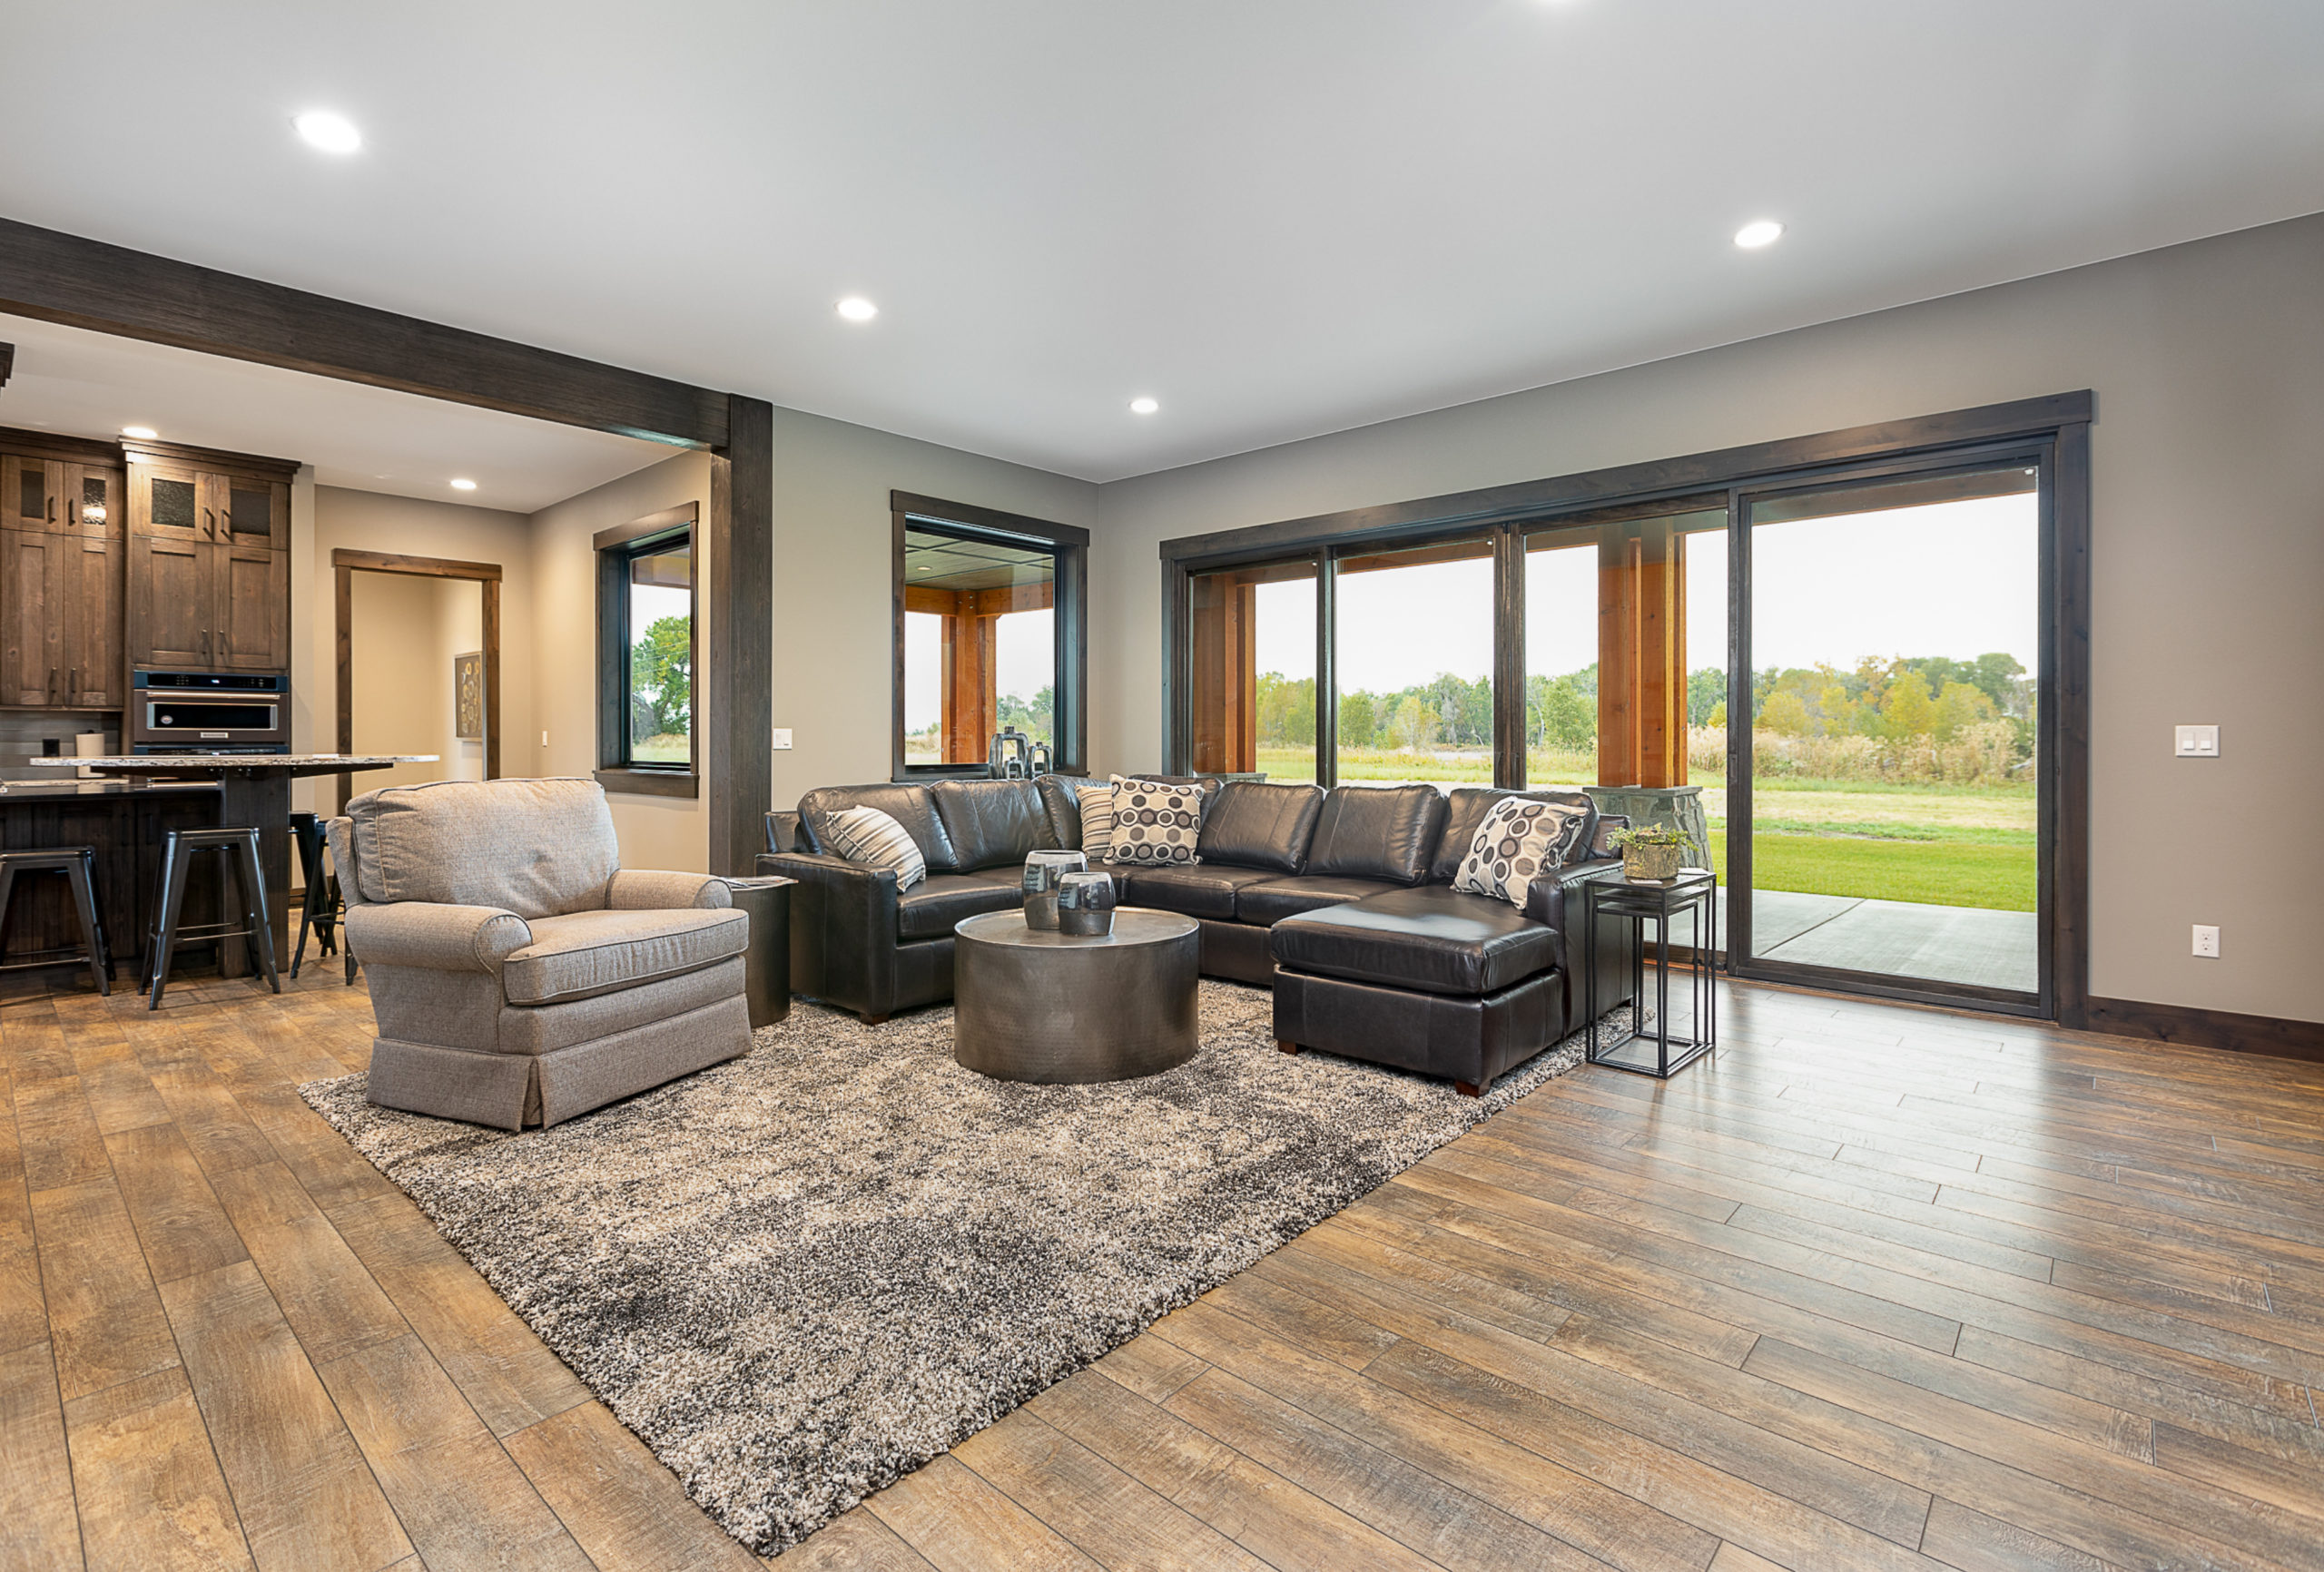 Walkout recreation room with leather couches